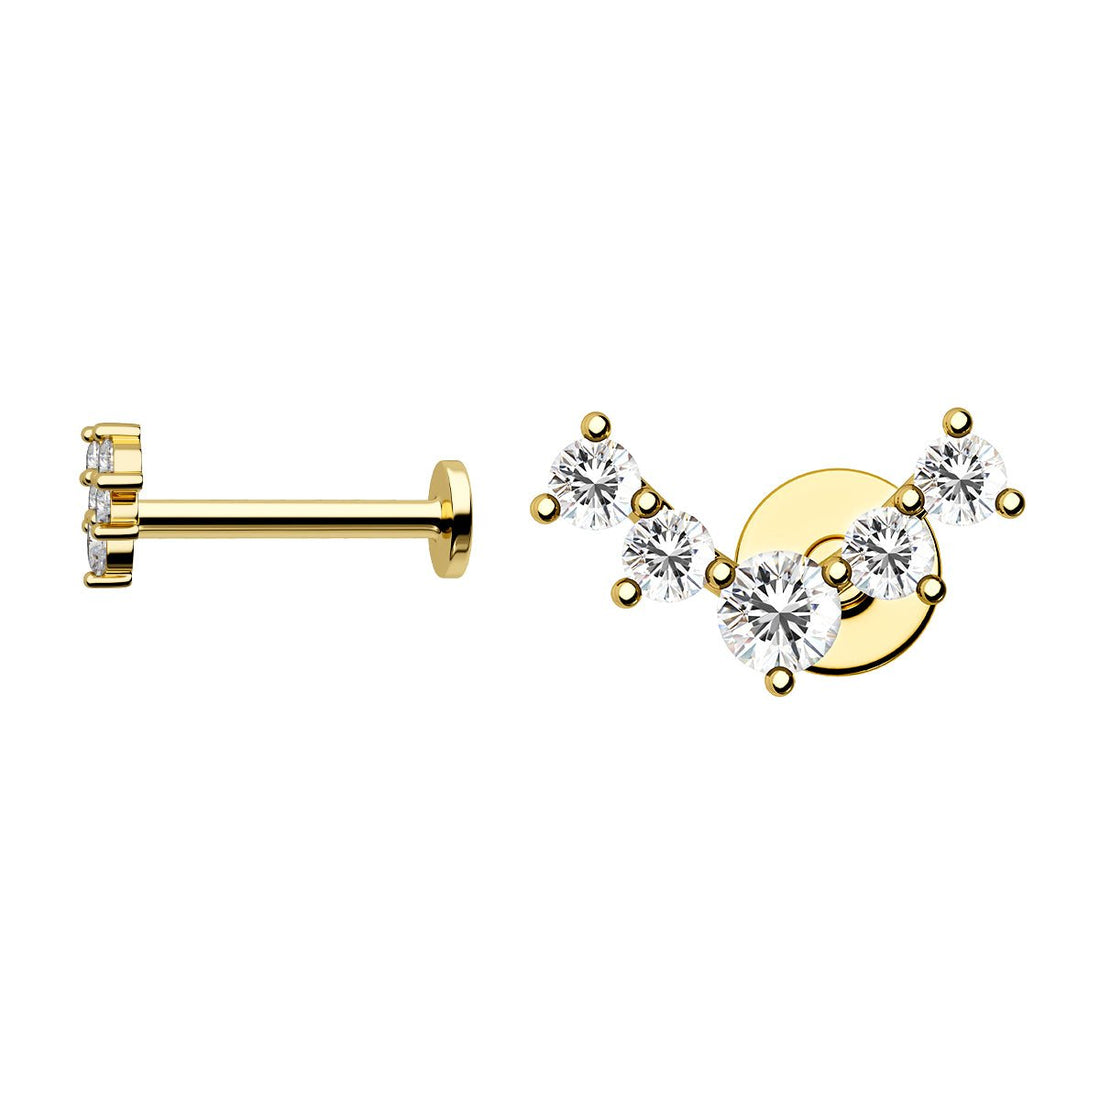 Stainless steel gold labret - Dr. Piercing Aftercare